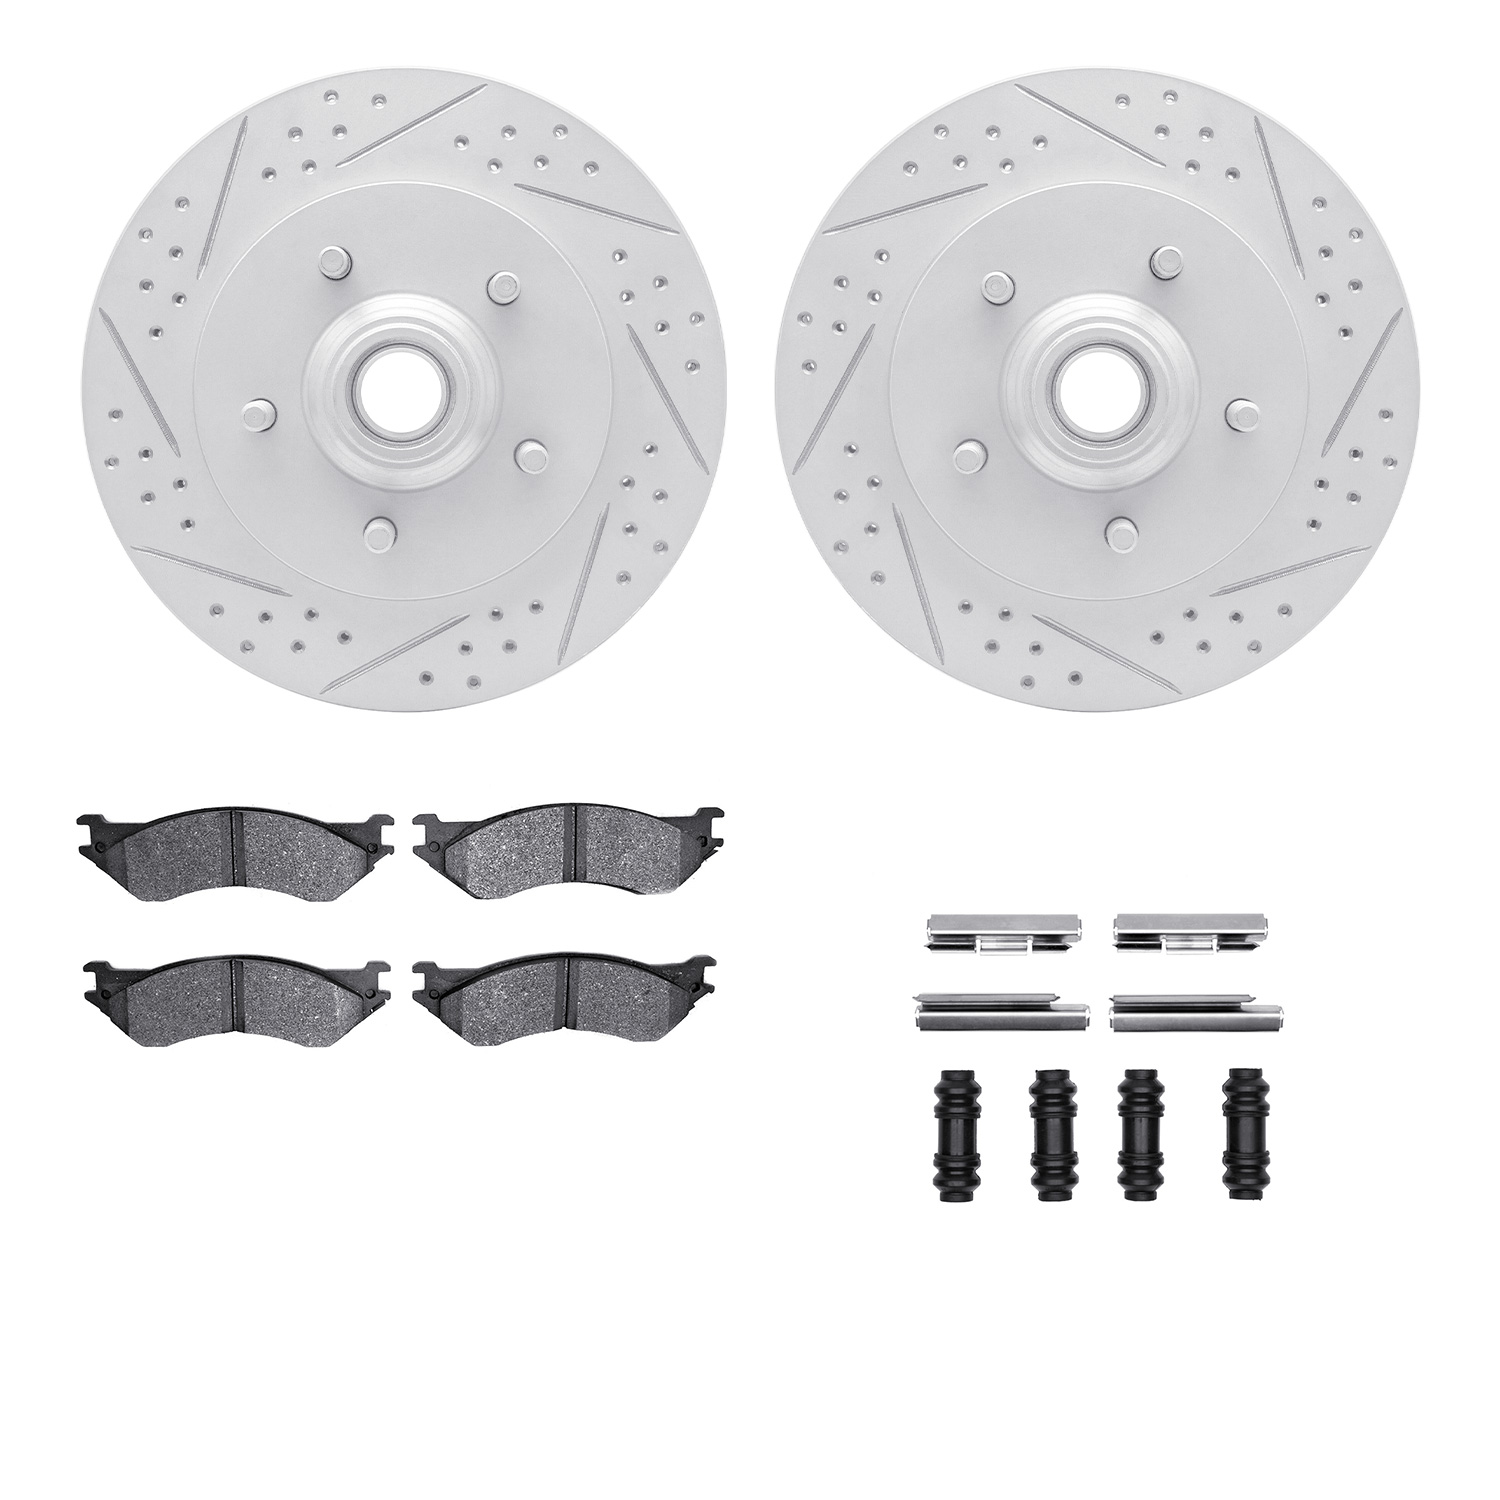 2212-99114 Geoperformance Drilled/Slotted Rotors w/Heavy-Duty Pads Kit & Hardware, 1999-2004 Ford/Lincoln/Mercury/Mazda, Positio